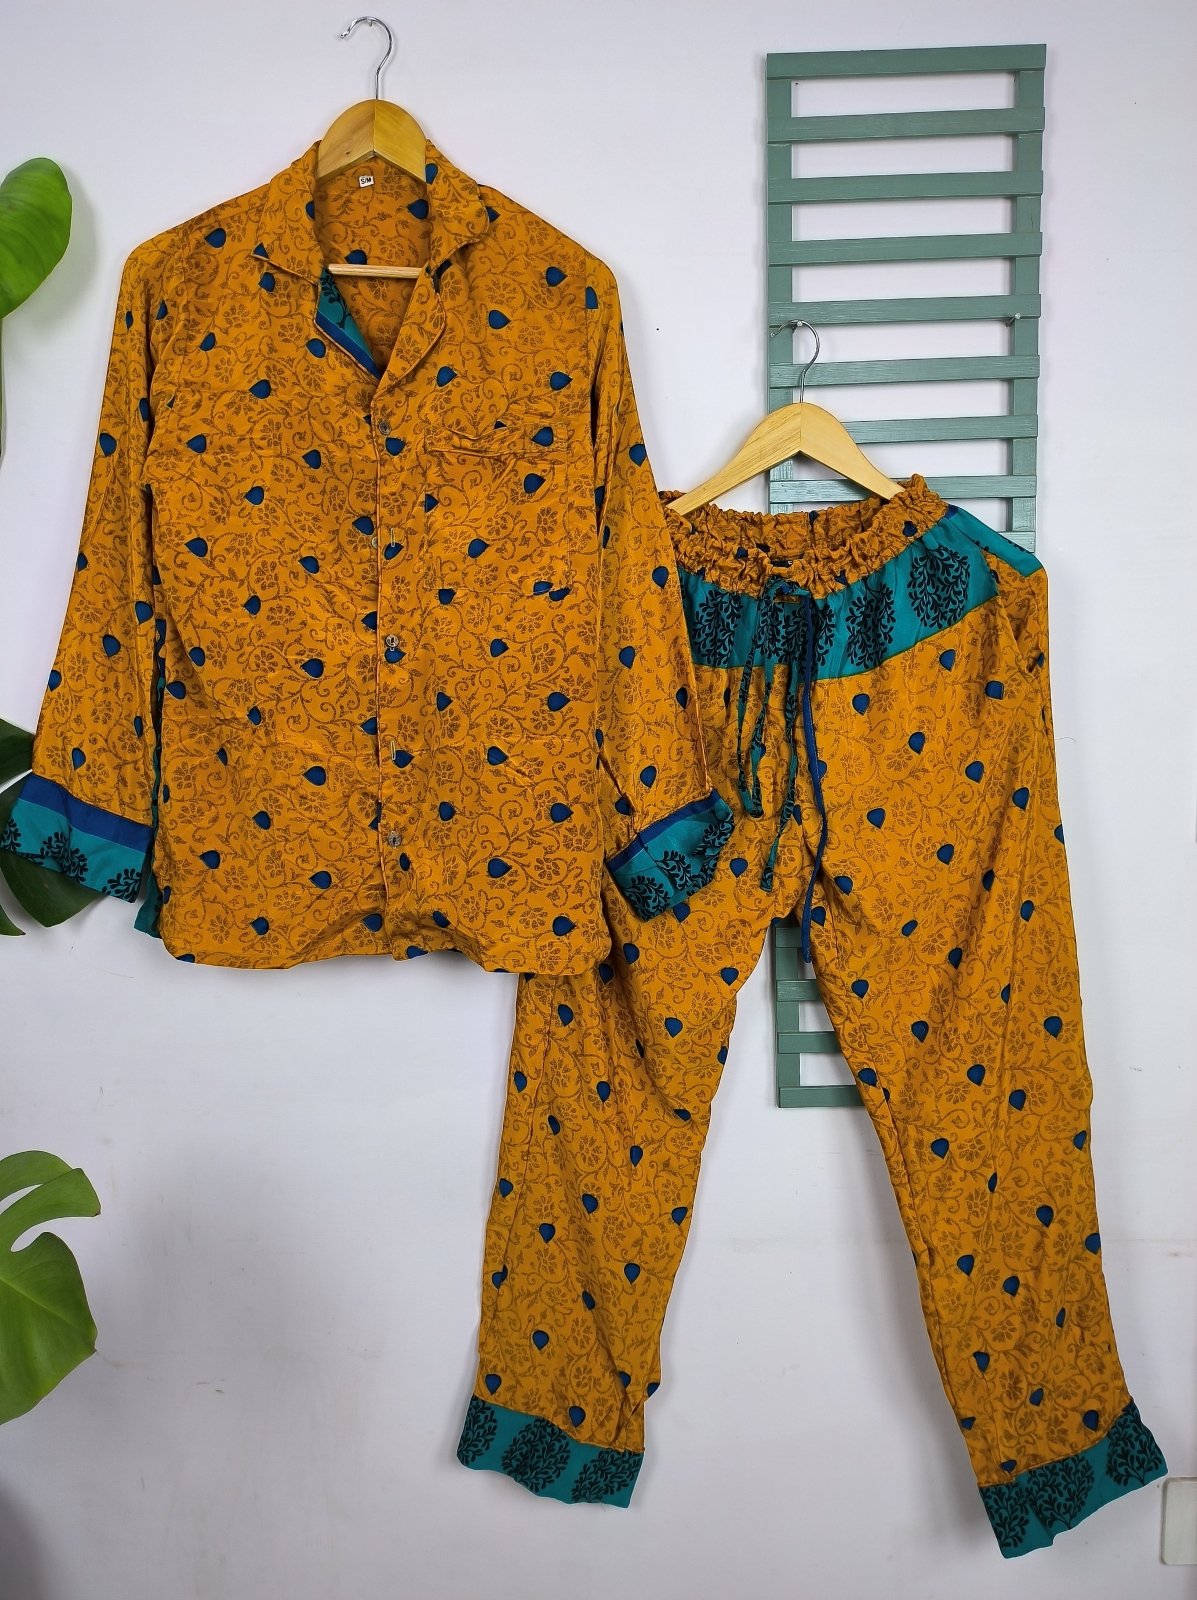 Copy of Recycle Silk Long Pajama Set, Lightweight and Breathable PJ Nightwear, Sustainable Women Girly Pajama Sleepwear Set, Silk Top and Bottom Gift for Her | S/M Size - The Eastern Loom